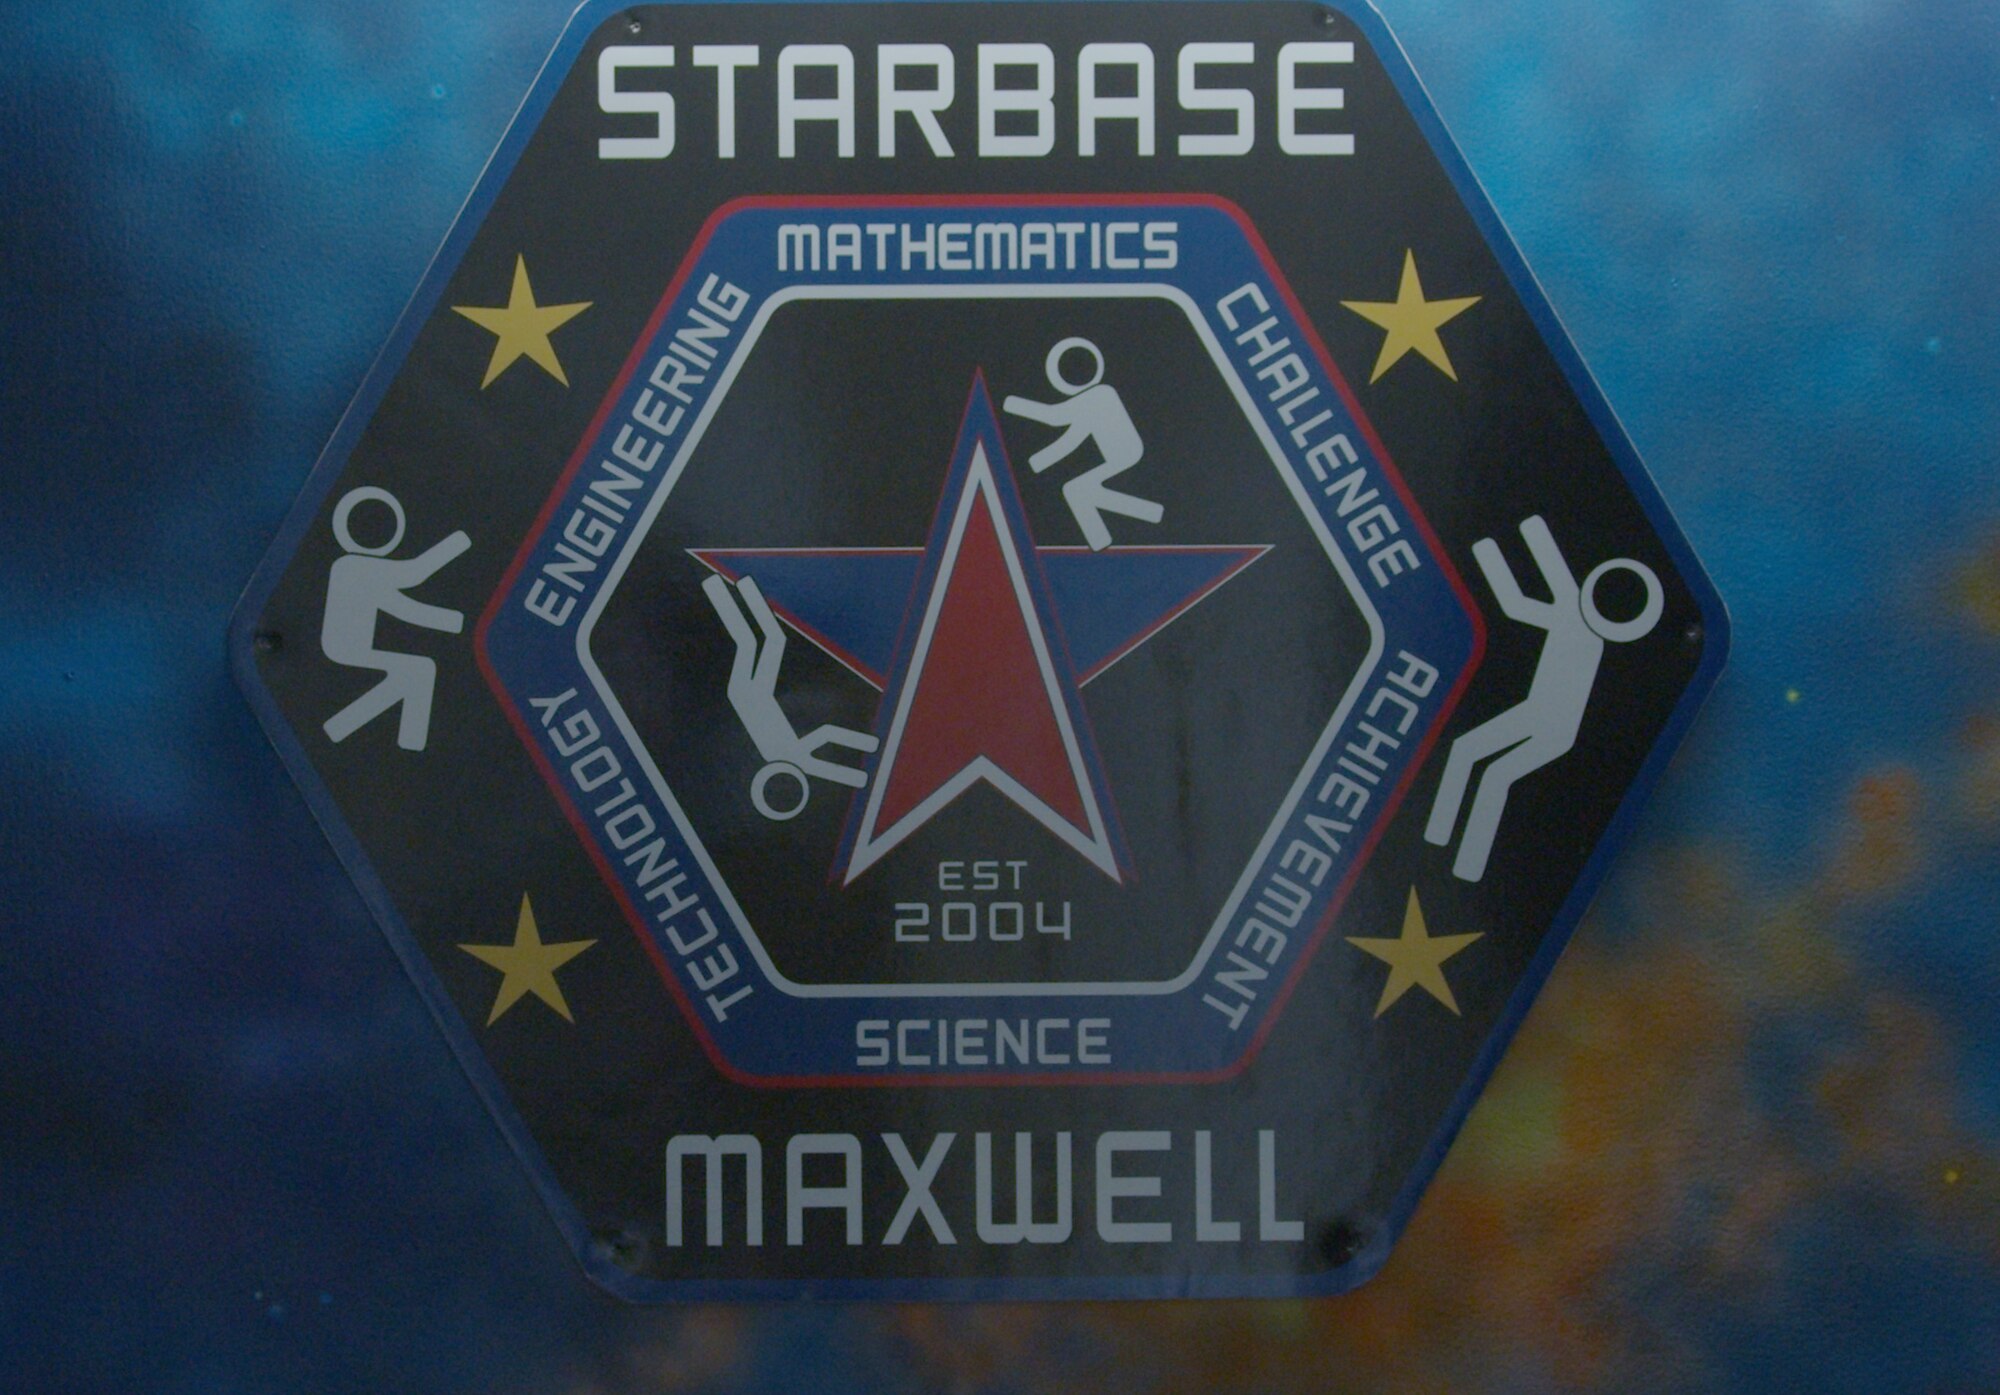 Starbase Maxwell has provided over 1,500 River Region students access to Department of Defense wealth of expertise in Science Technology Engineering and Math career ﬁelds this year.